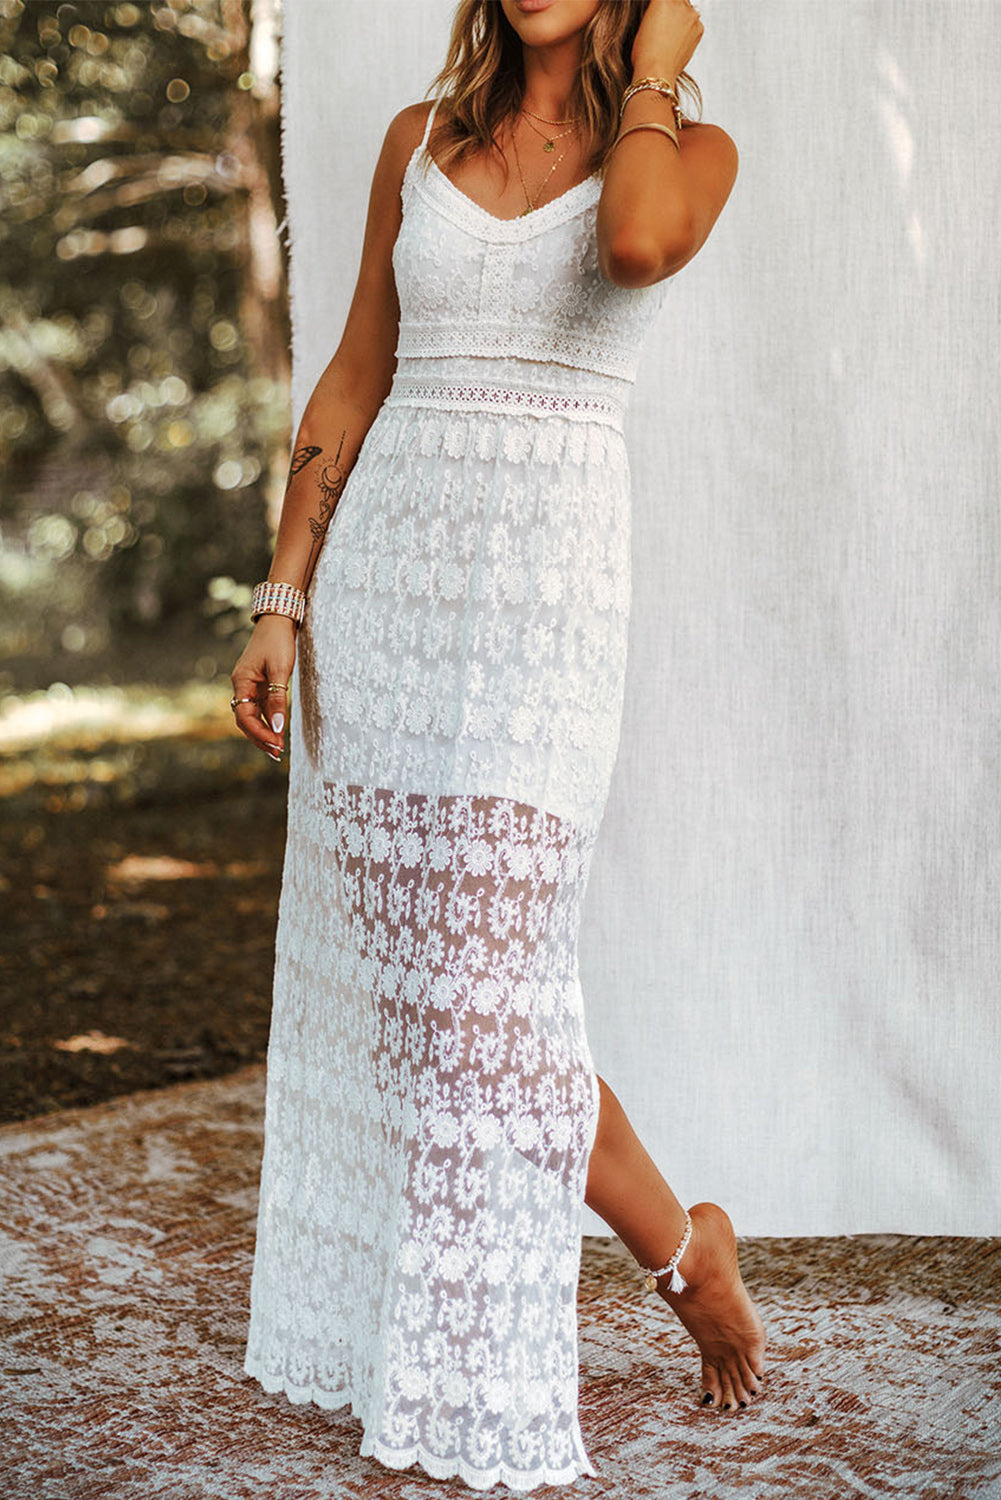 Chic White Spaghetti Straps Lace Lined Maxi Dress with Slits